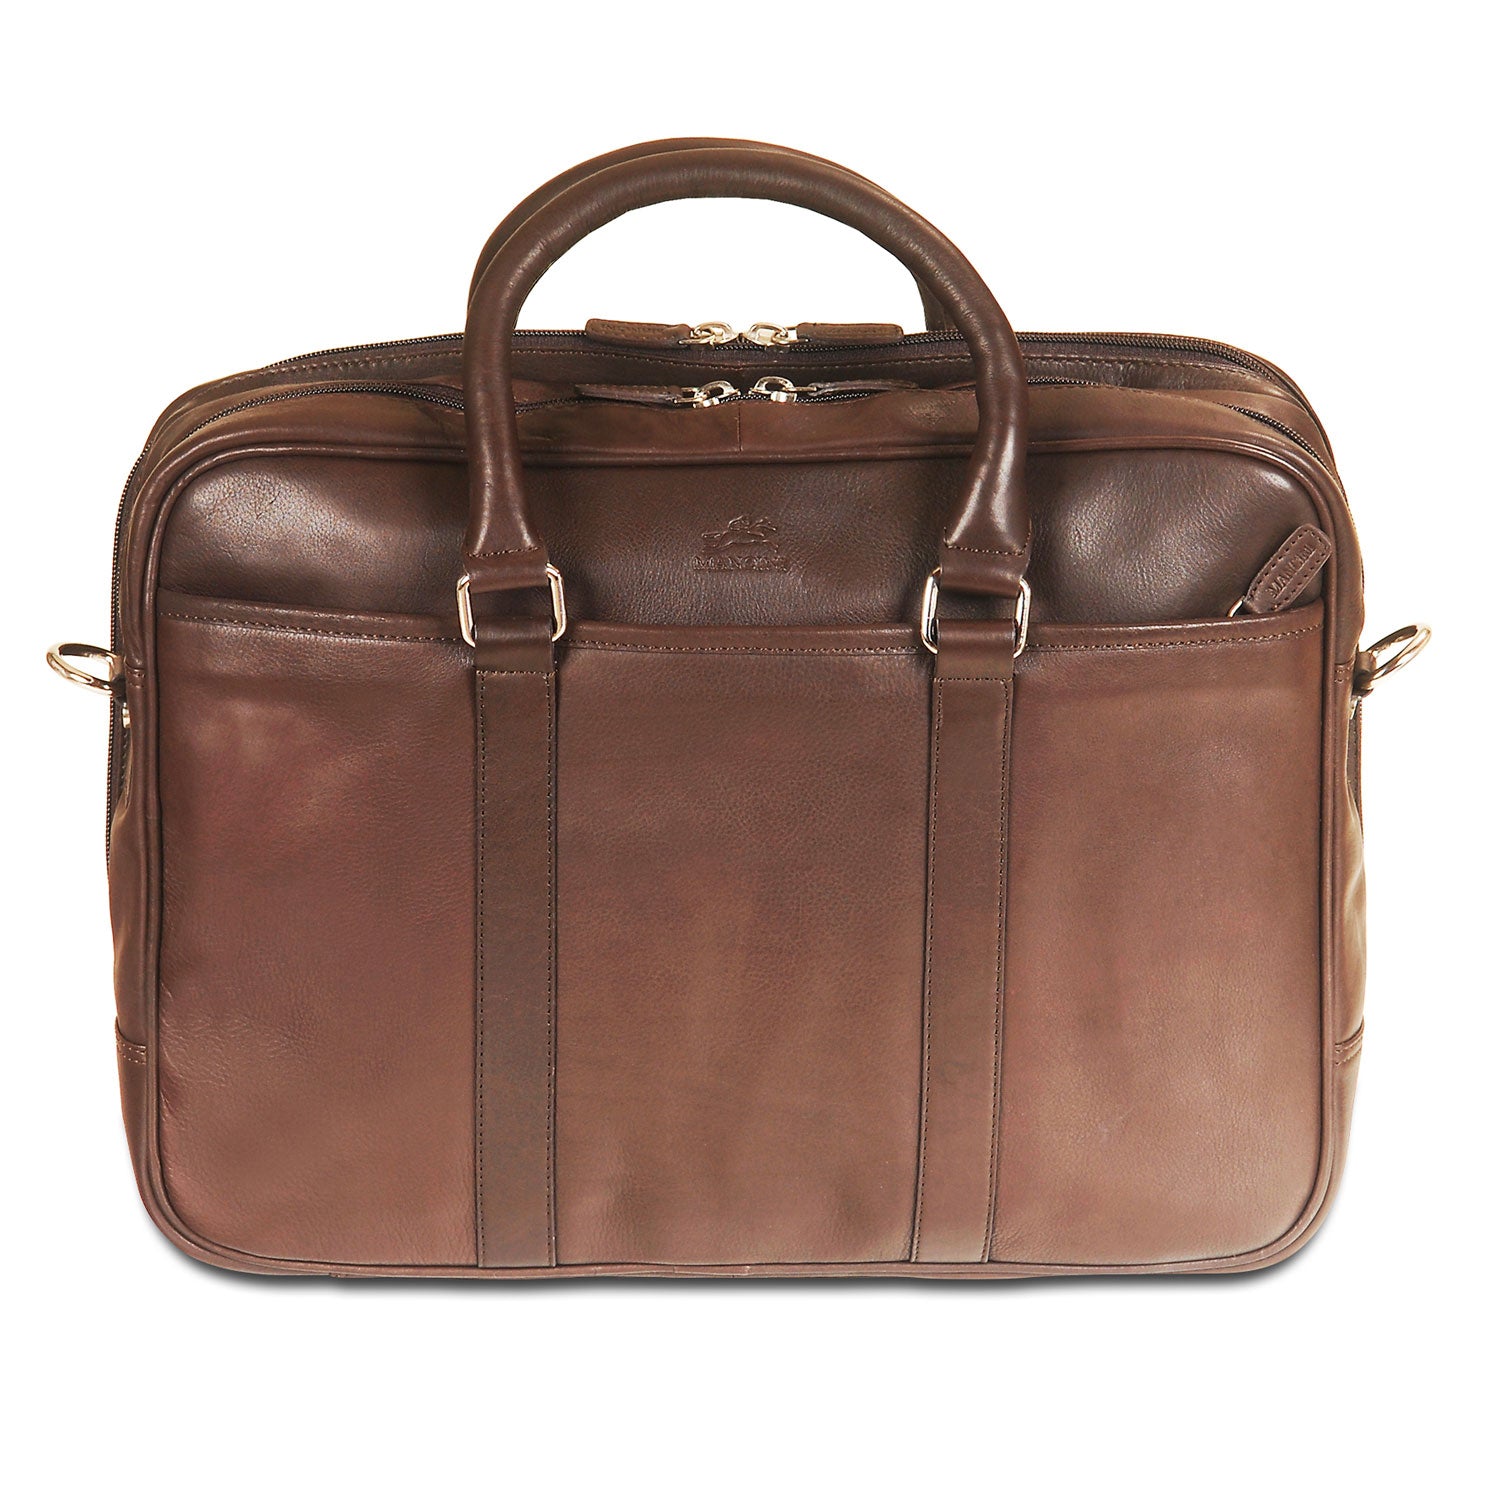 Mancini Leather Double Compartment Zippered Briefcase for 15.6" Laptop / Tablet, 15.5" x 4.25" x 11.25", Brown